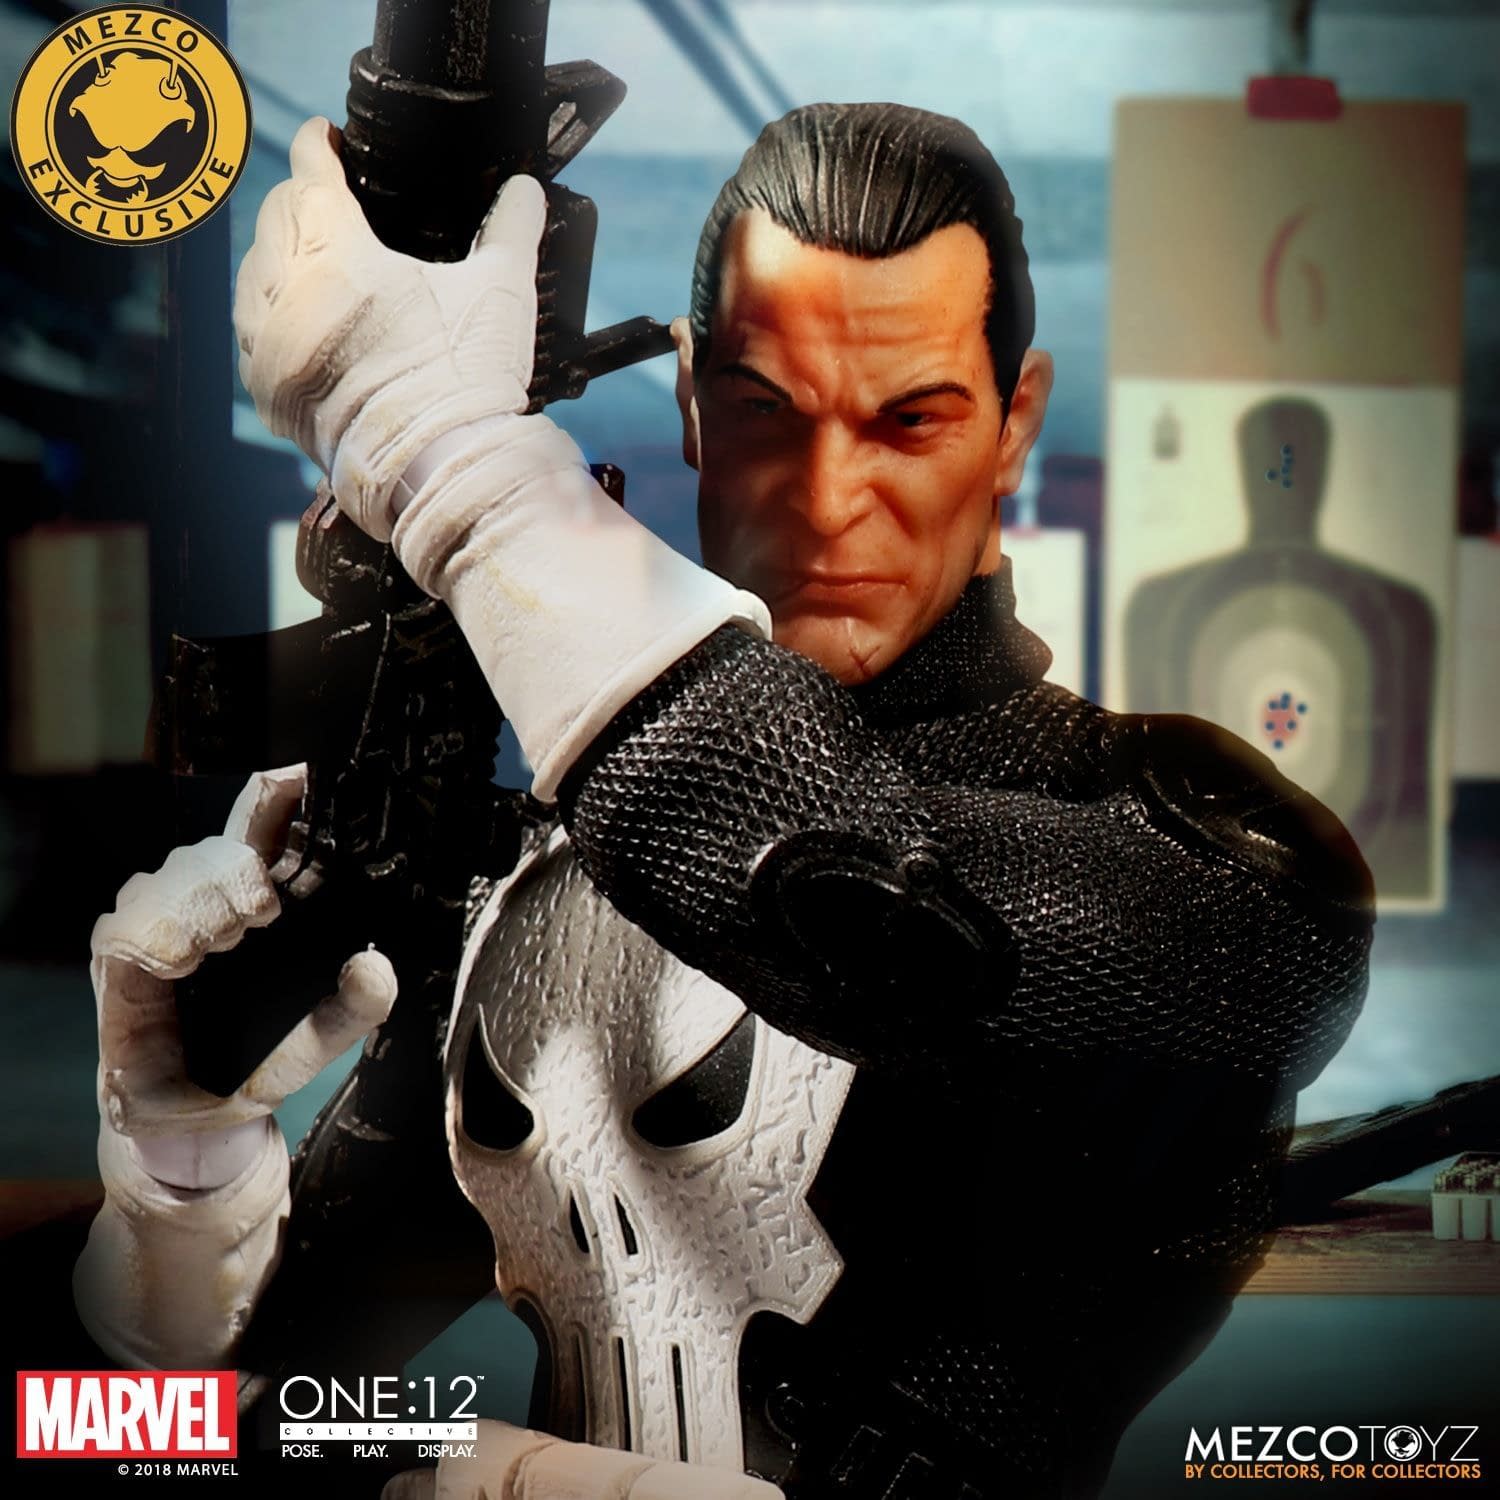 Punisher Gets a One:12 Collective SDCC Exclusive from Mezco Toyz